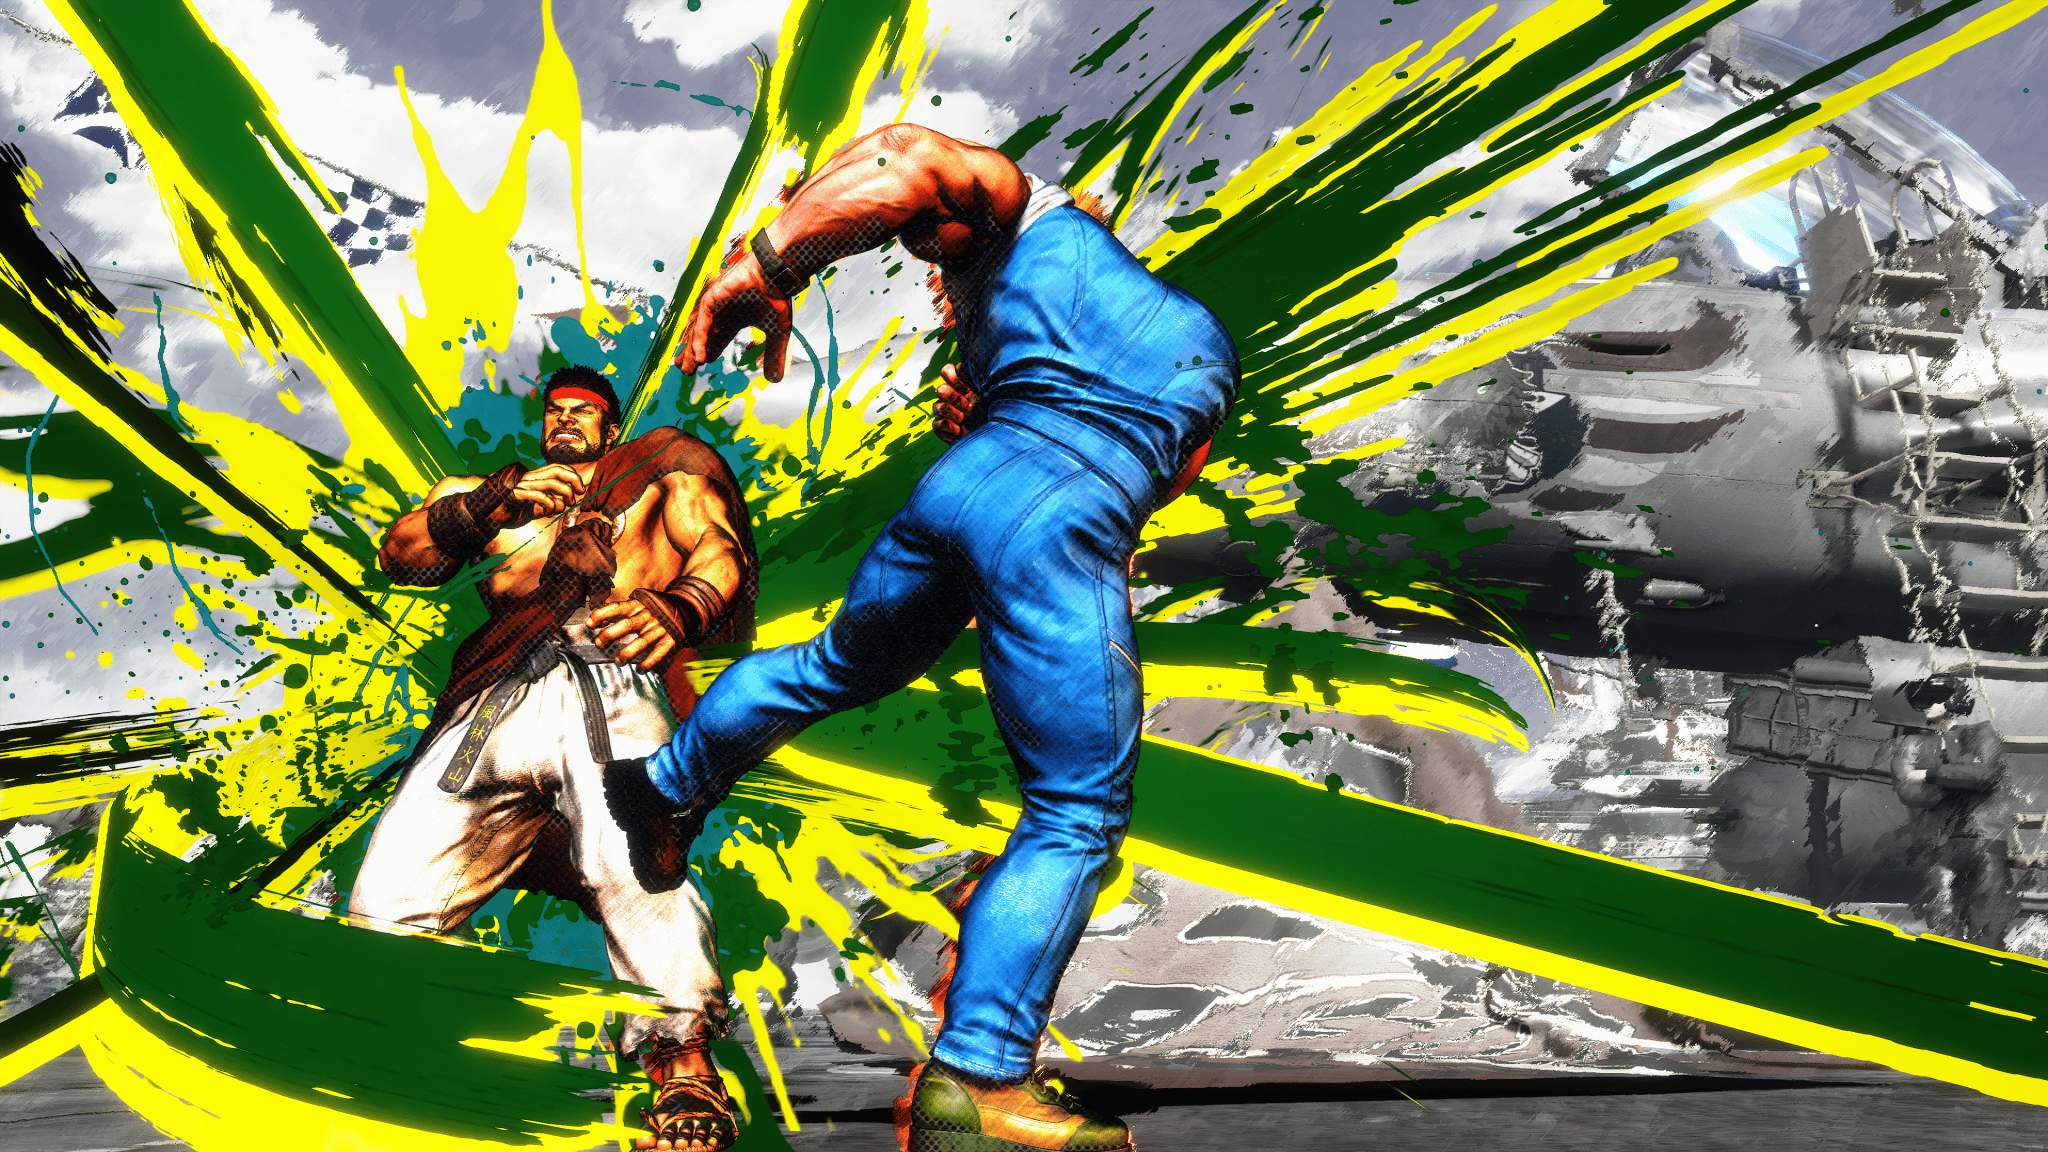 Street Fighter 6 Adds Guile To The Roster In New Gameplay Trailer